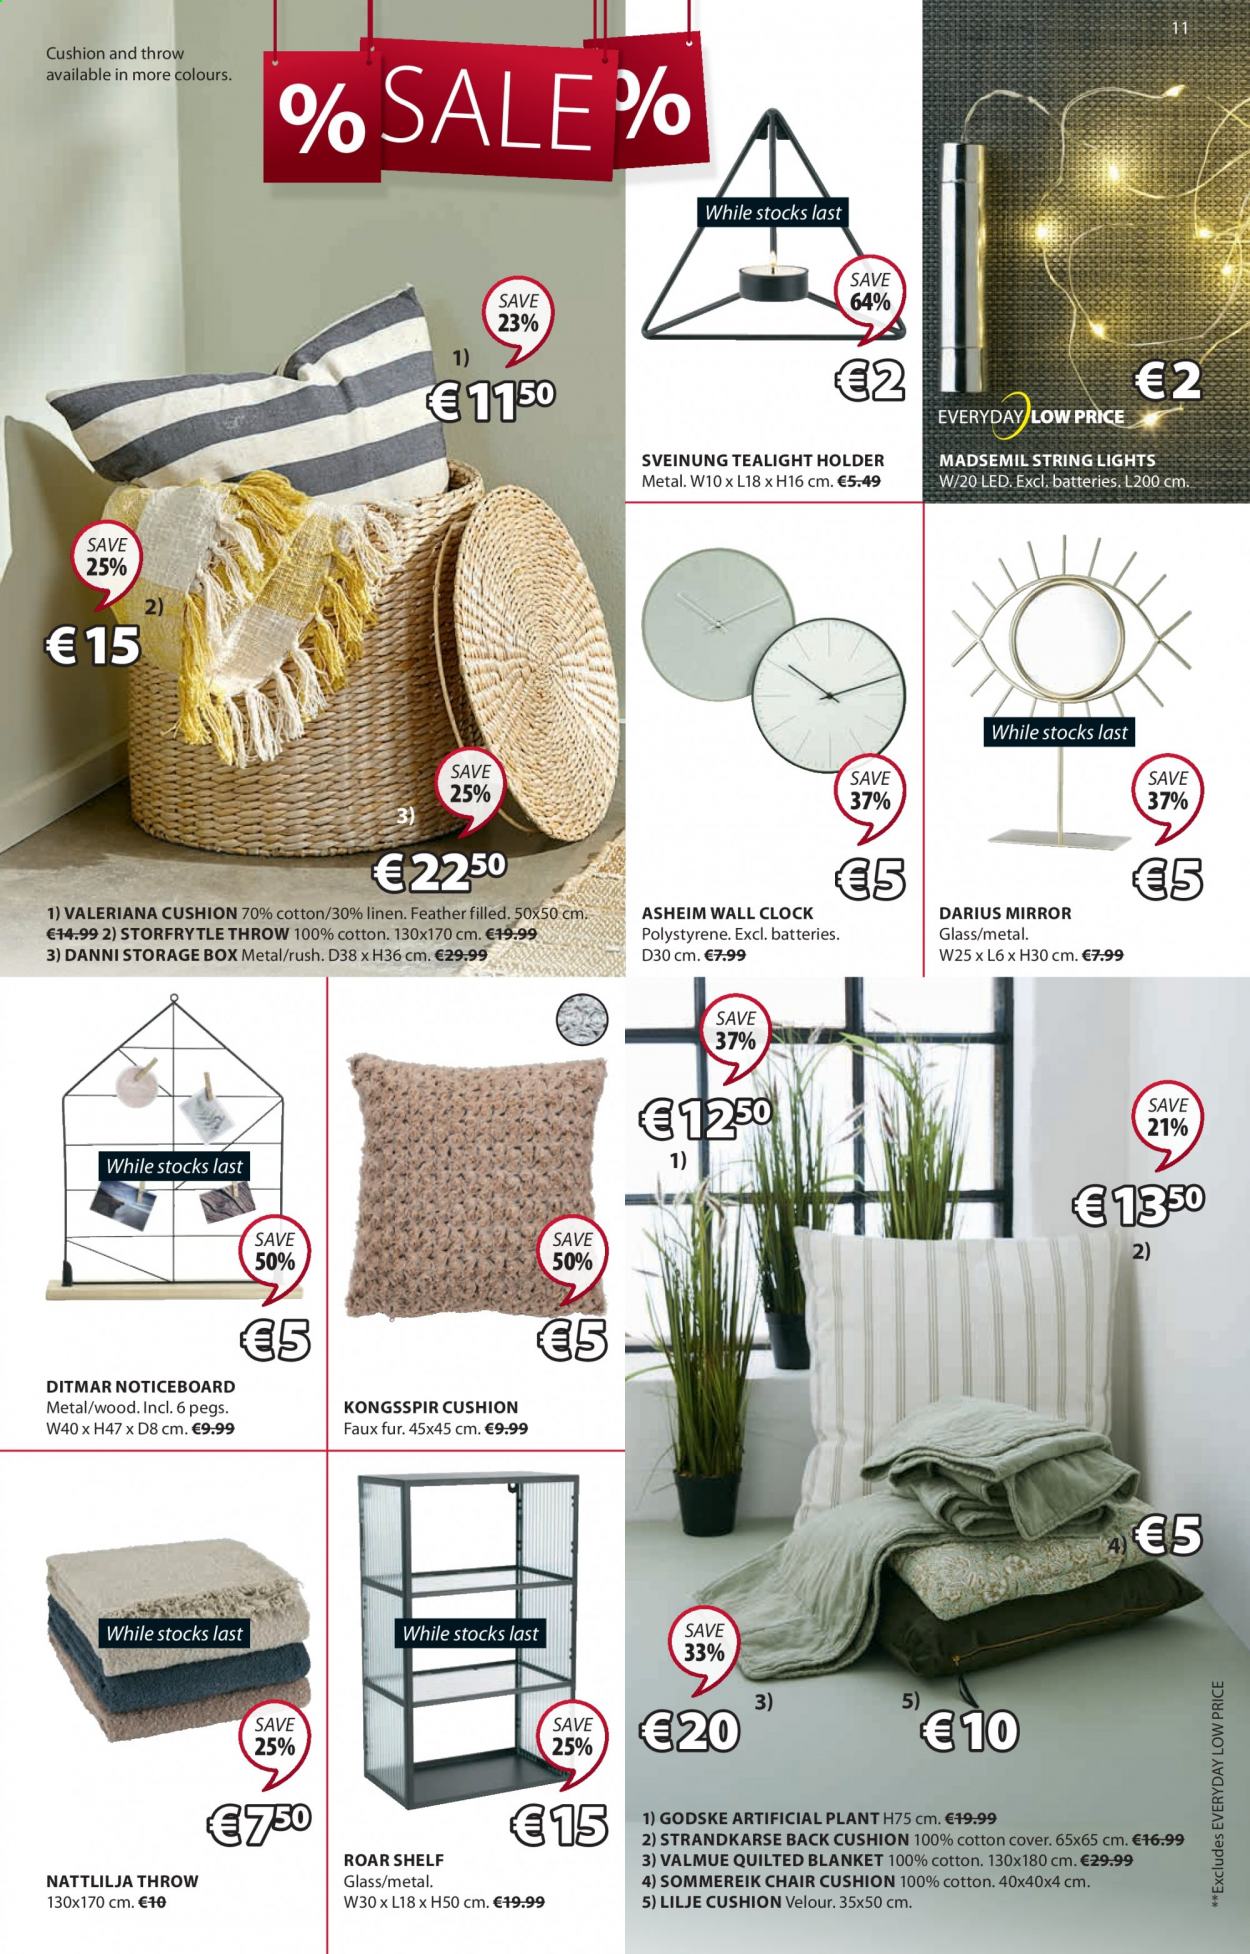 thumbnail - JYSK offer  - 08.07.2021 - 21.07.2021 - Sales products - storage box, chair, shelves, cushion, mirror, tealight holder, artificial plant, clock, holder, tealight, blanket, linens, string lights. Page 11.